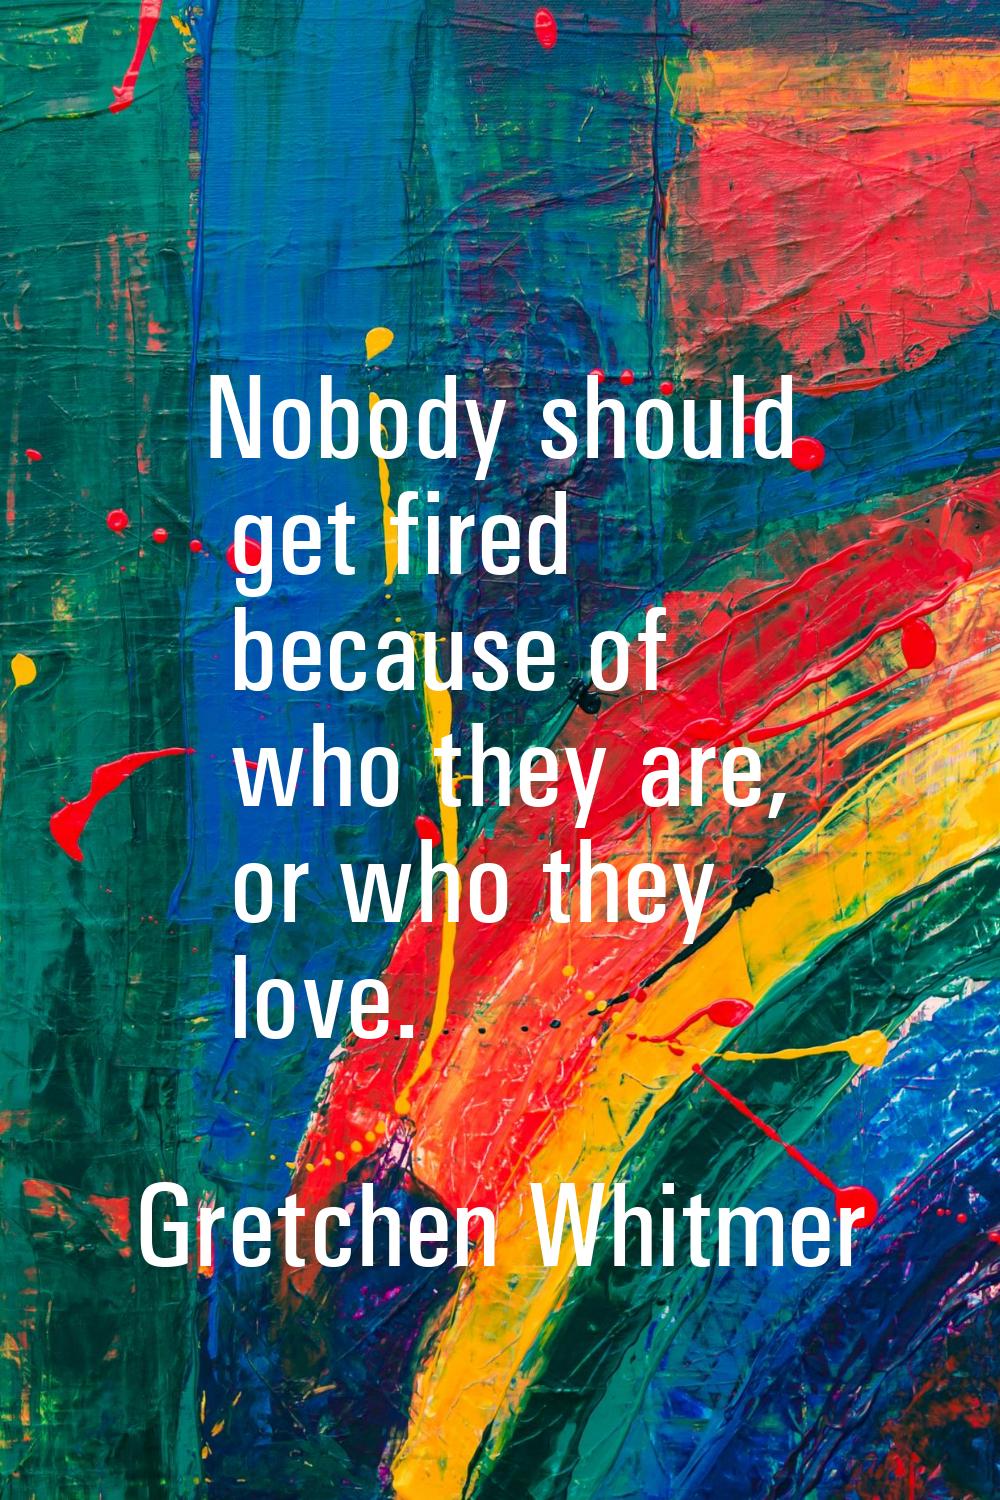 Nobody should get fired because of who they are, or who they love.